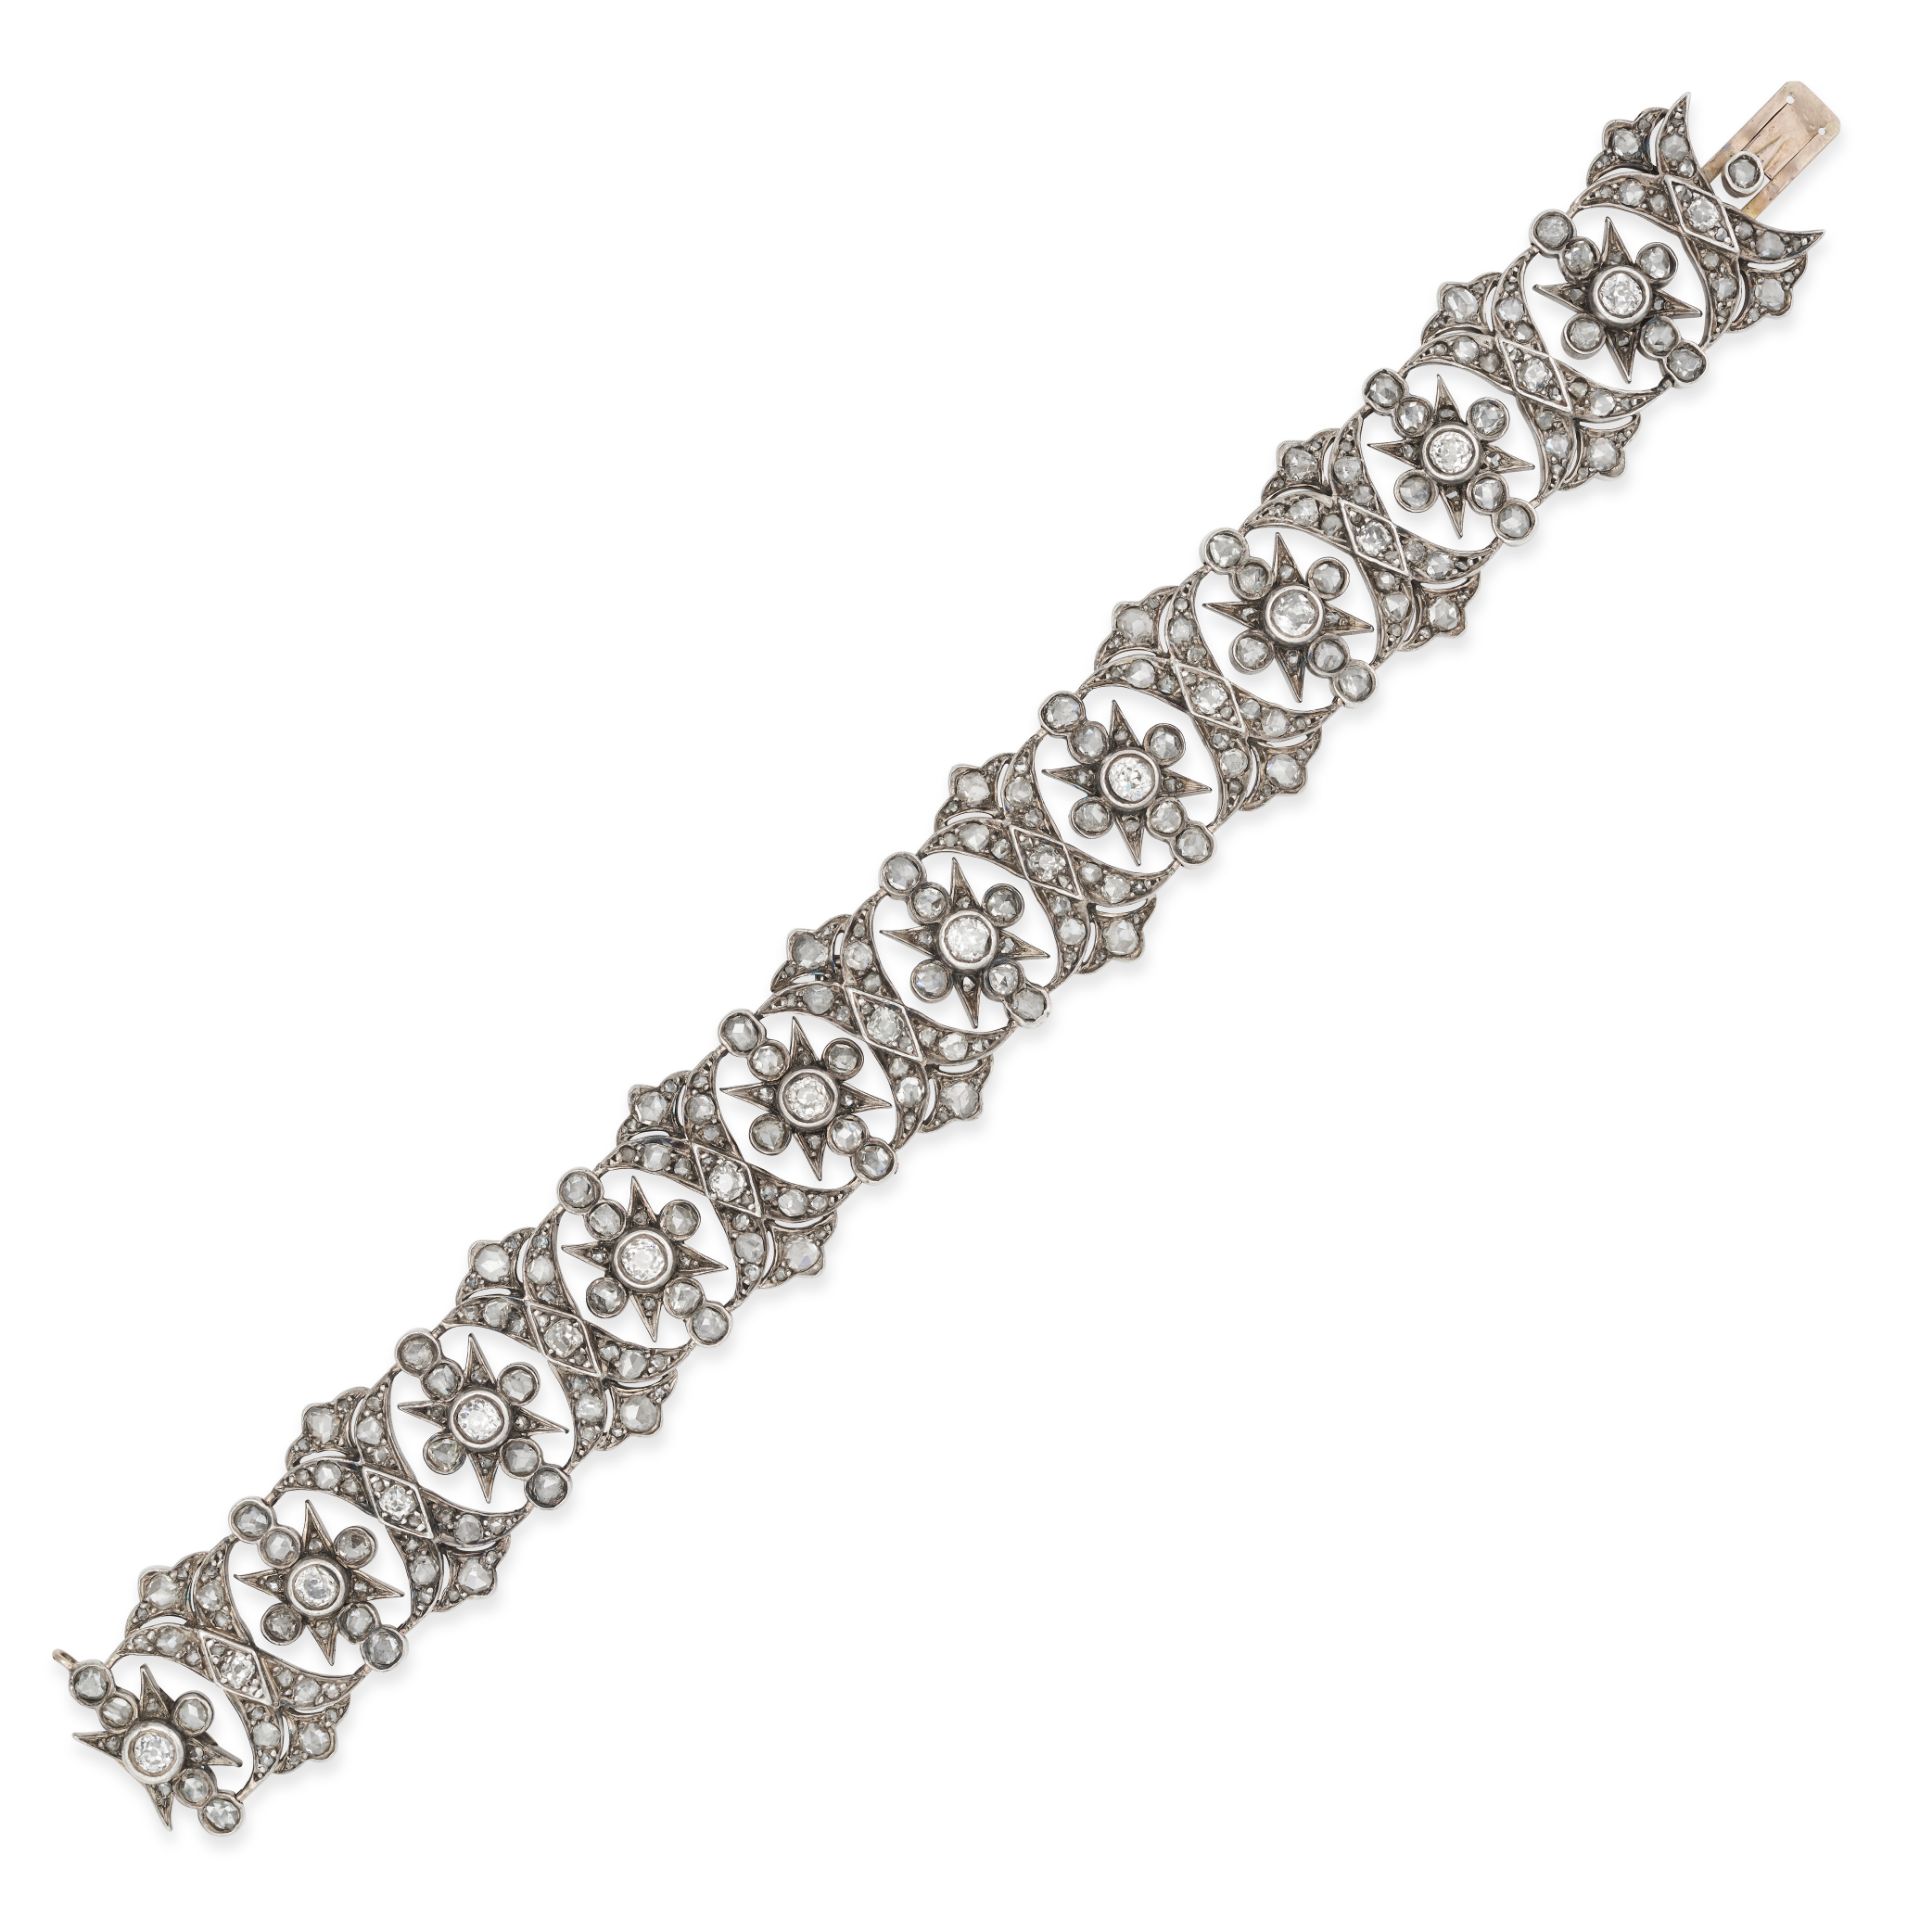 A DIAMOND BRACELET in yellow gold and silver, the openwork bracelet set throughout with old and r...